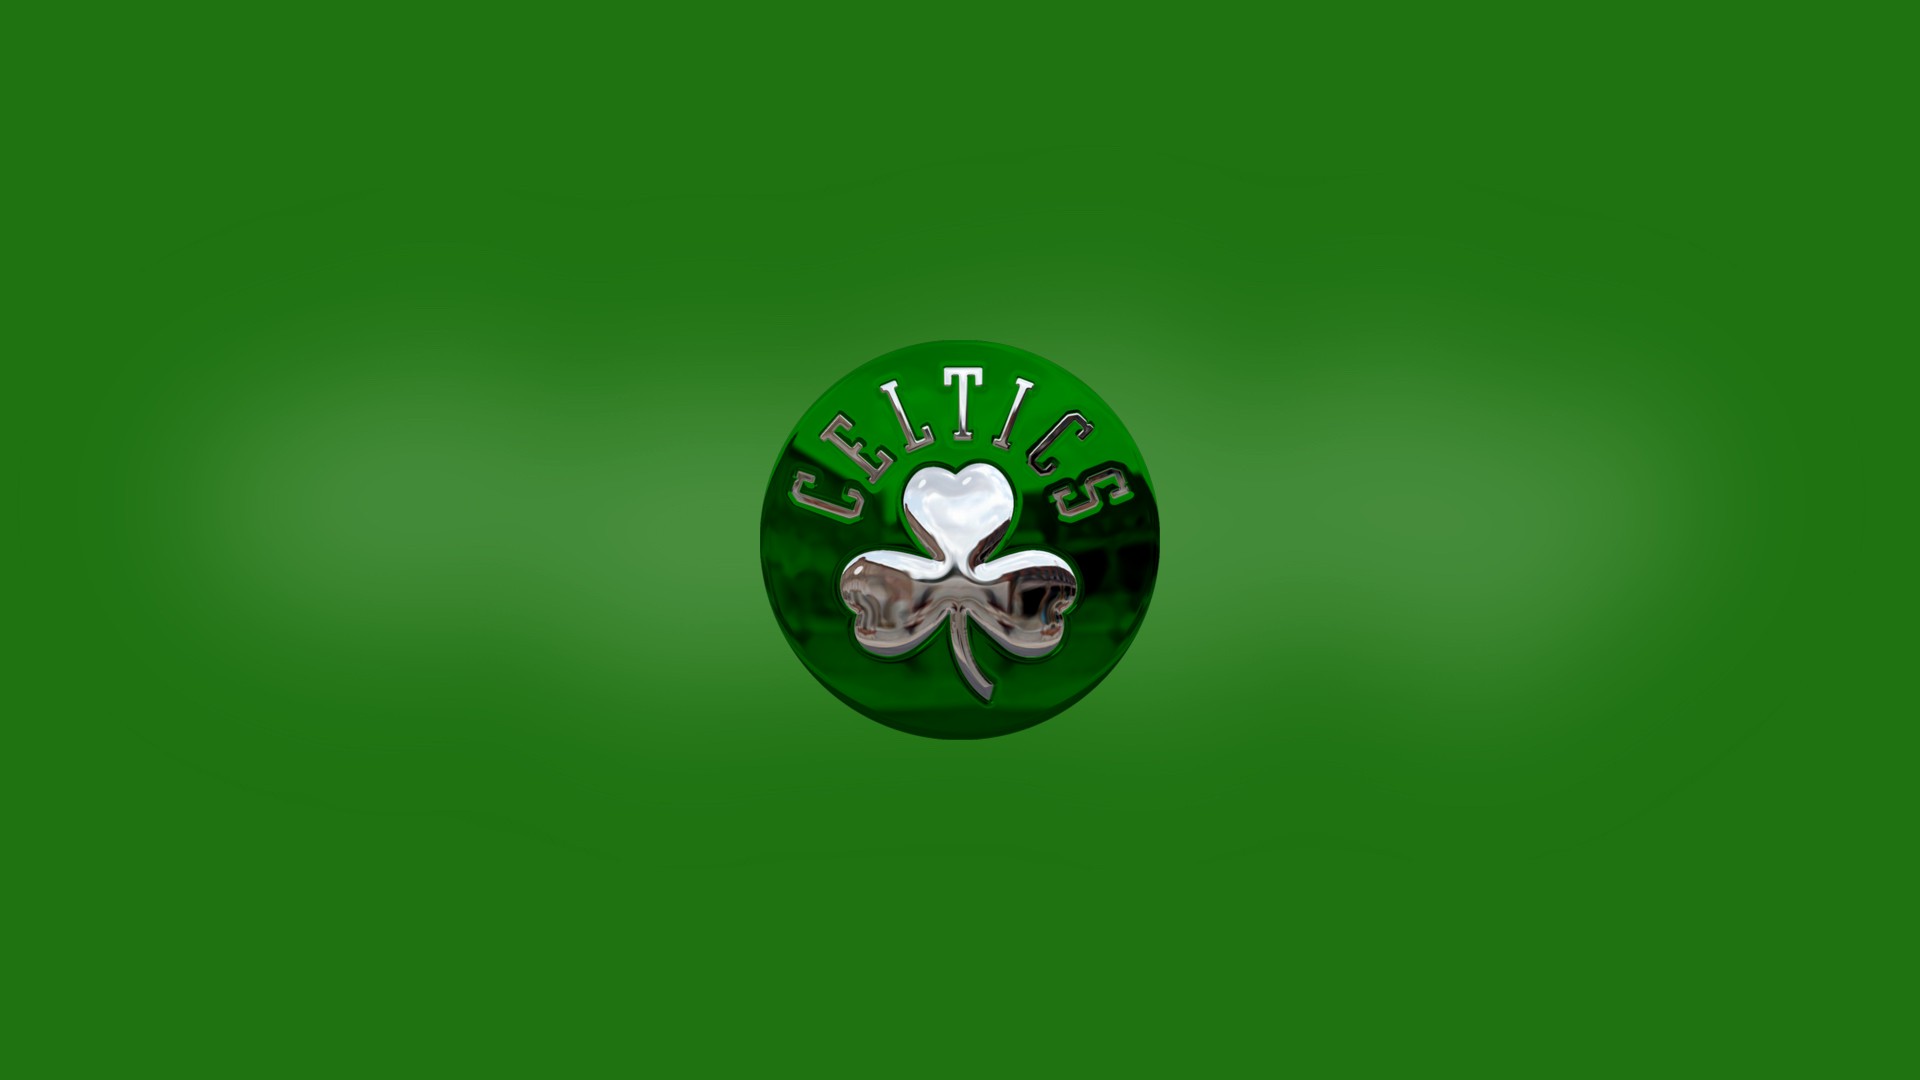 Boston Celtics HD Backgrounds With Resolution 1920X1080 pixel. You can make this wallpaper for your Desktop Computer Backgrounds, Mac Wallpapers, Android Lock screen or iPhone Screensavers